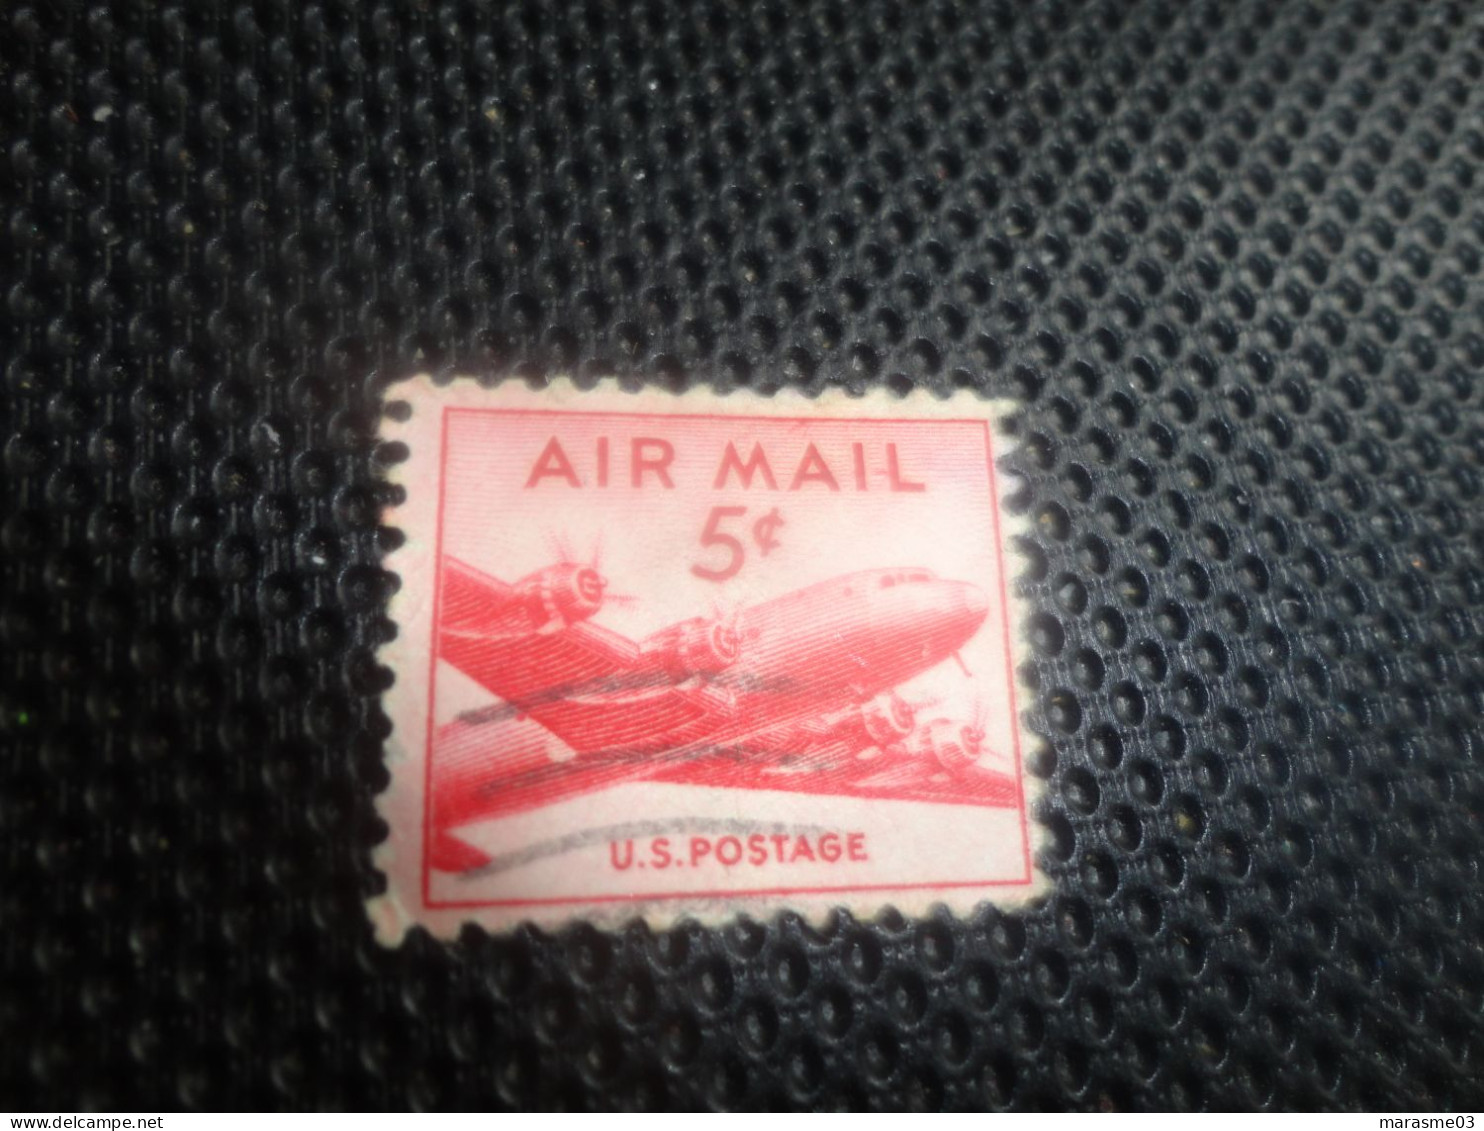 TIMBRE : : U.S. Postage  5c AIR MAIL Avion Vers La Droite (vers 1950) - Used Stamps